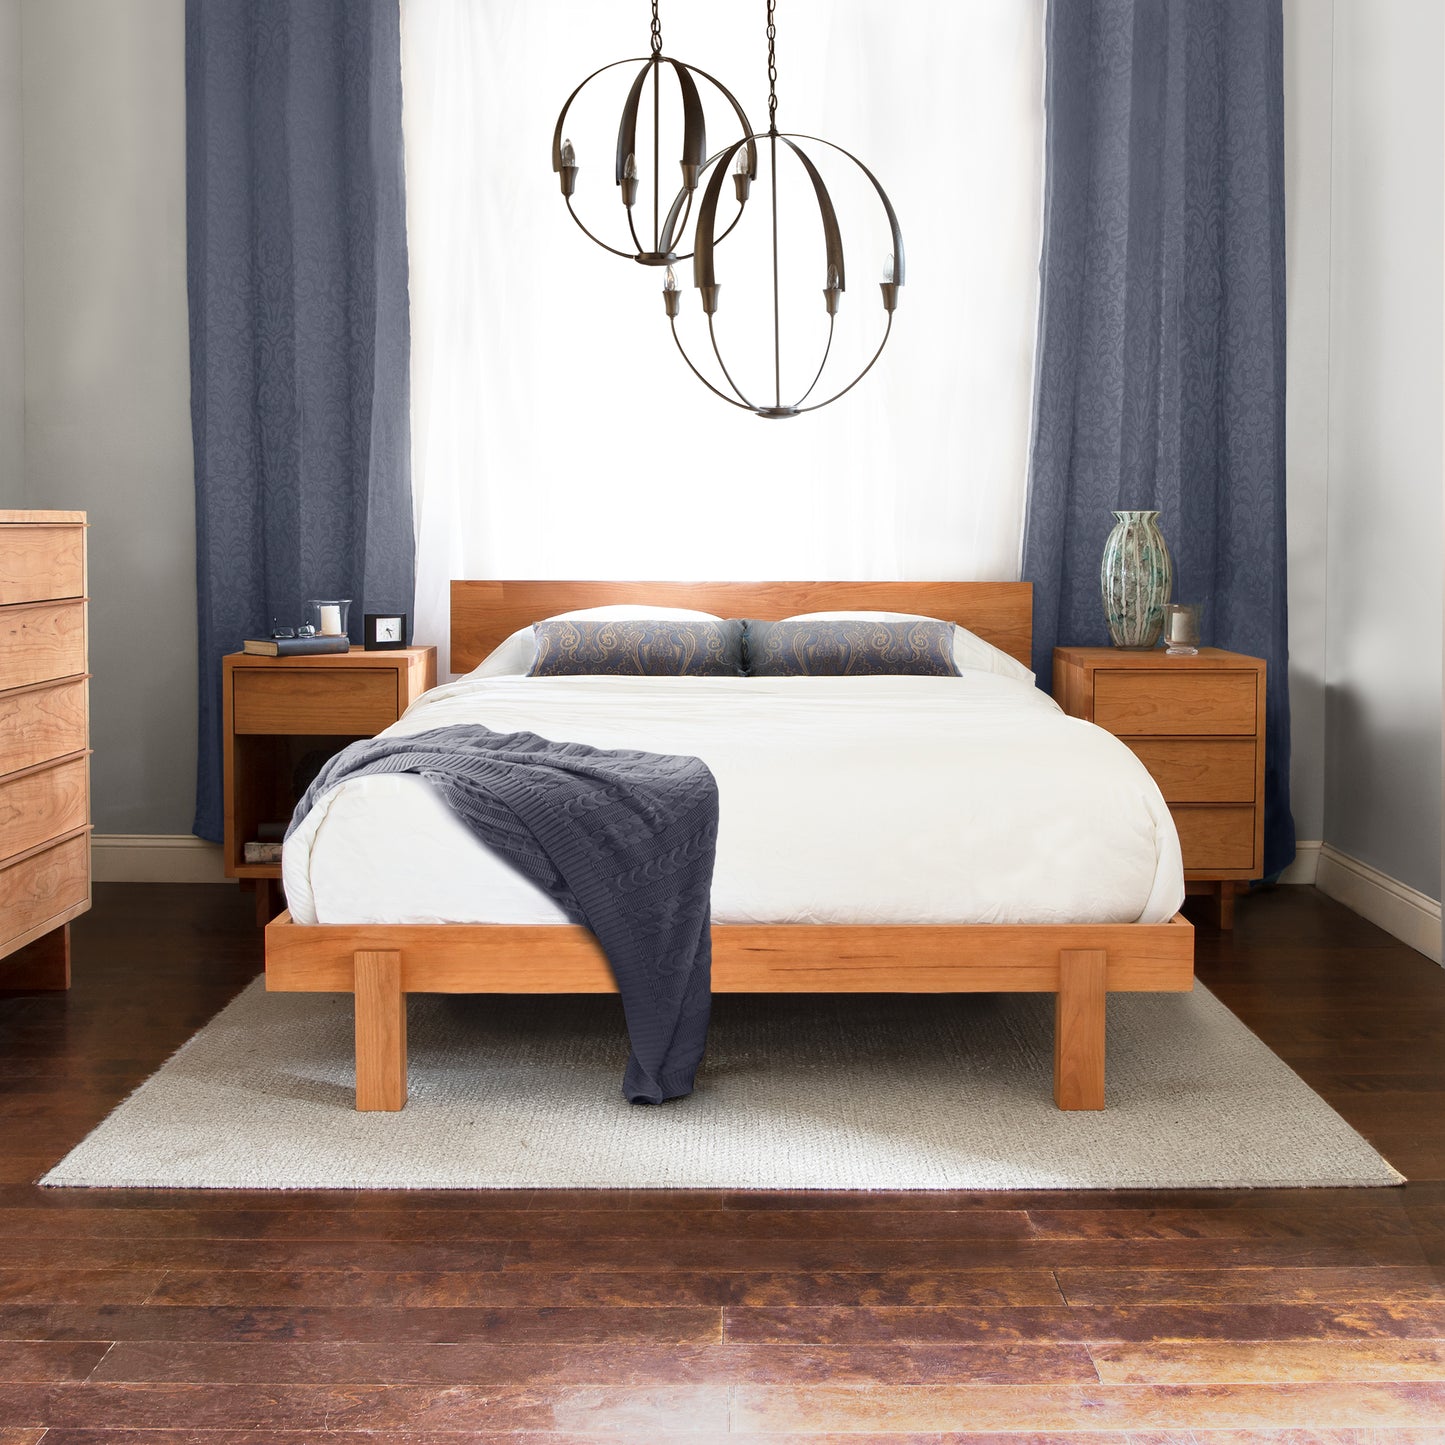 A neatly arranged bedroom with a Vermont Furniture Designs Kipling Platform Bed, white bedding, a gray blanket at the foot of the bed, two matching nightstands, and an elegant circular chandelier.